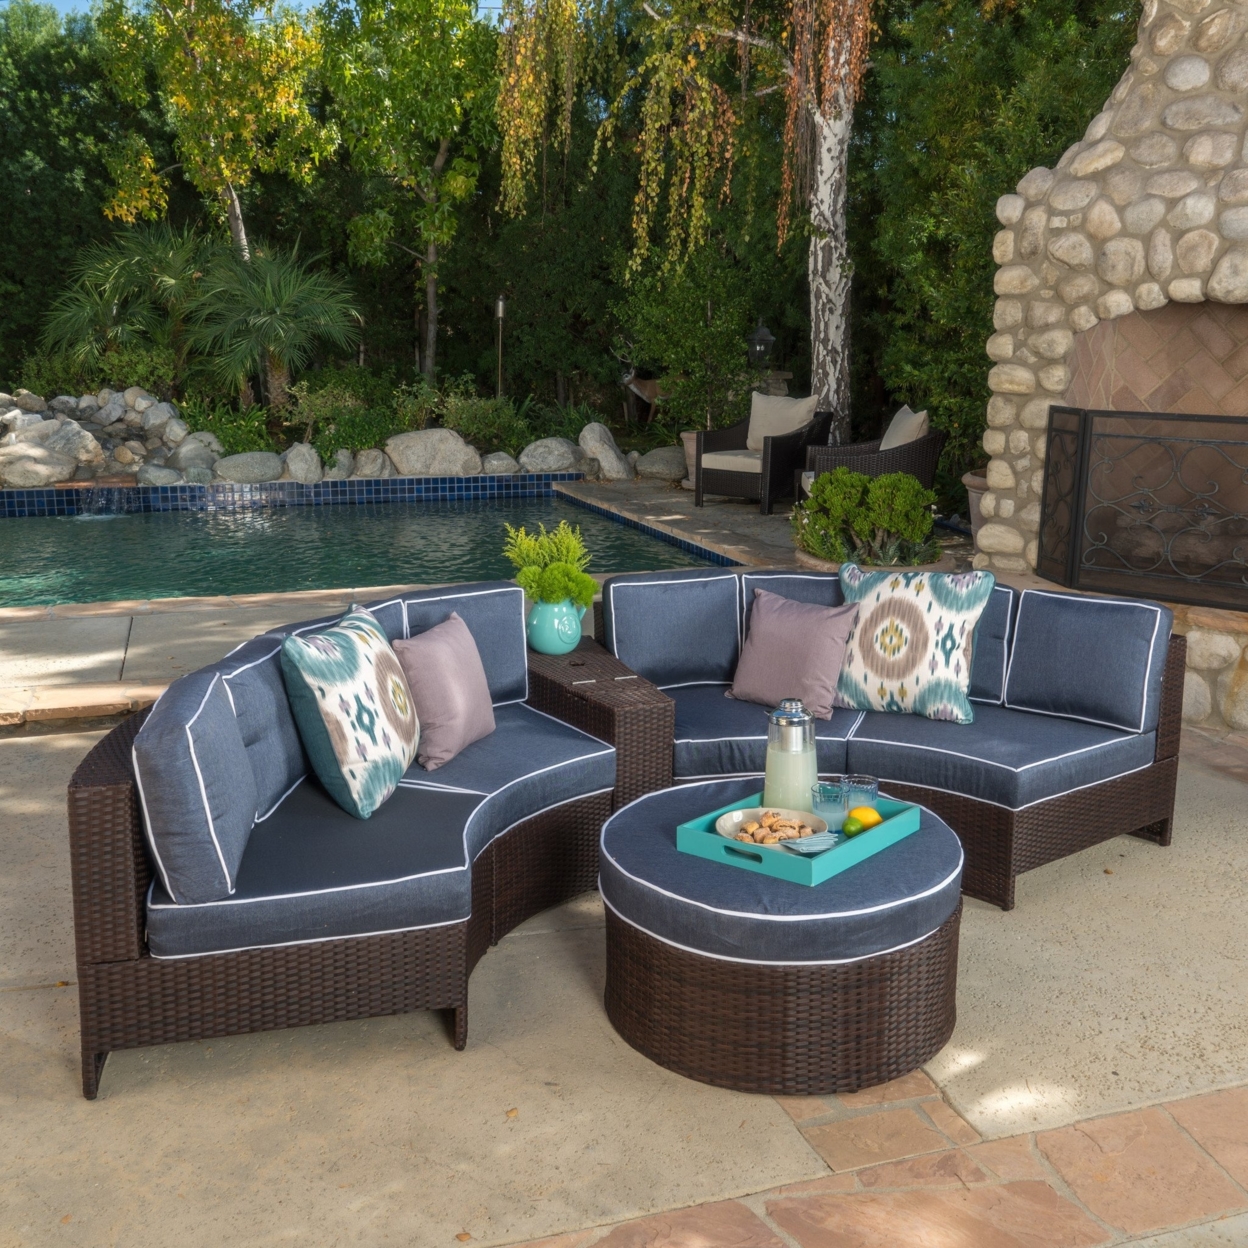 Riviera 6pc Outdoor Sectional Sofa Set With Storage Trunk - Blue